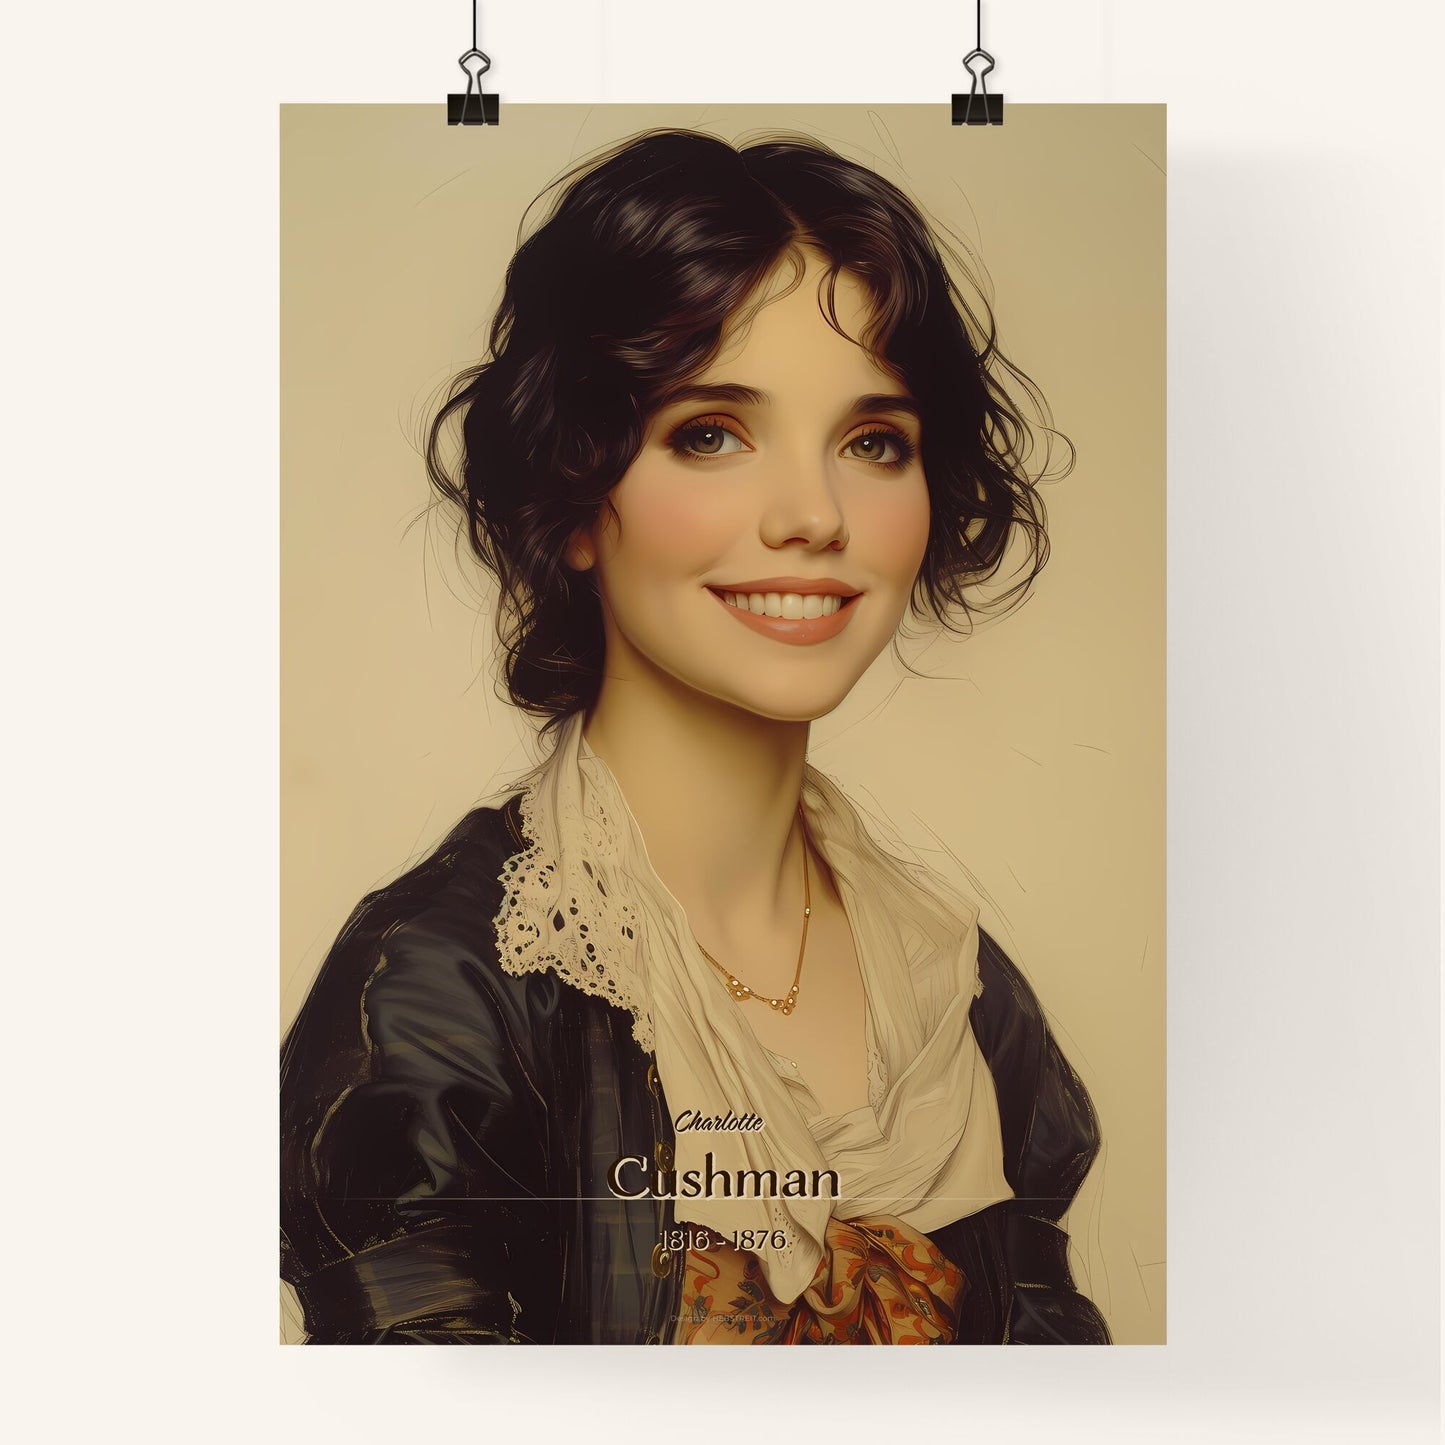 Charlotte, Cushman, 1816 - 1876, A Poster of a woman smiling with a white scarf Default Title